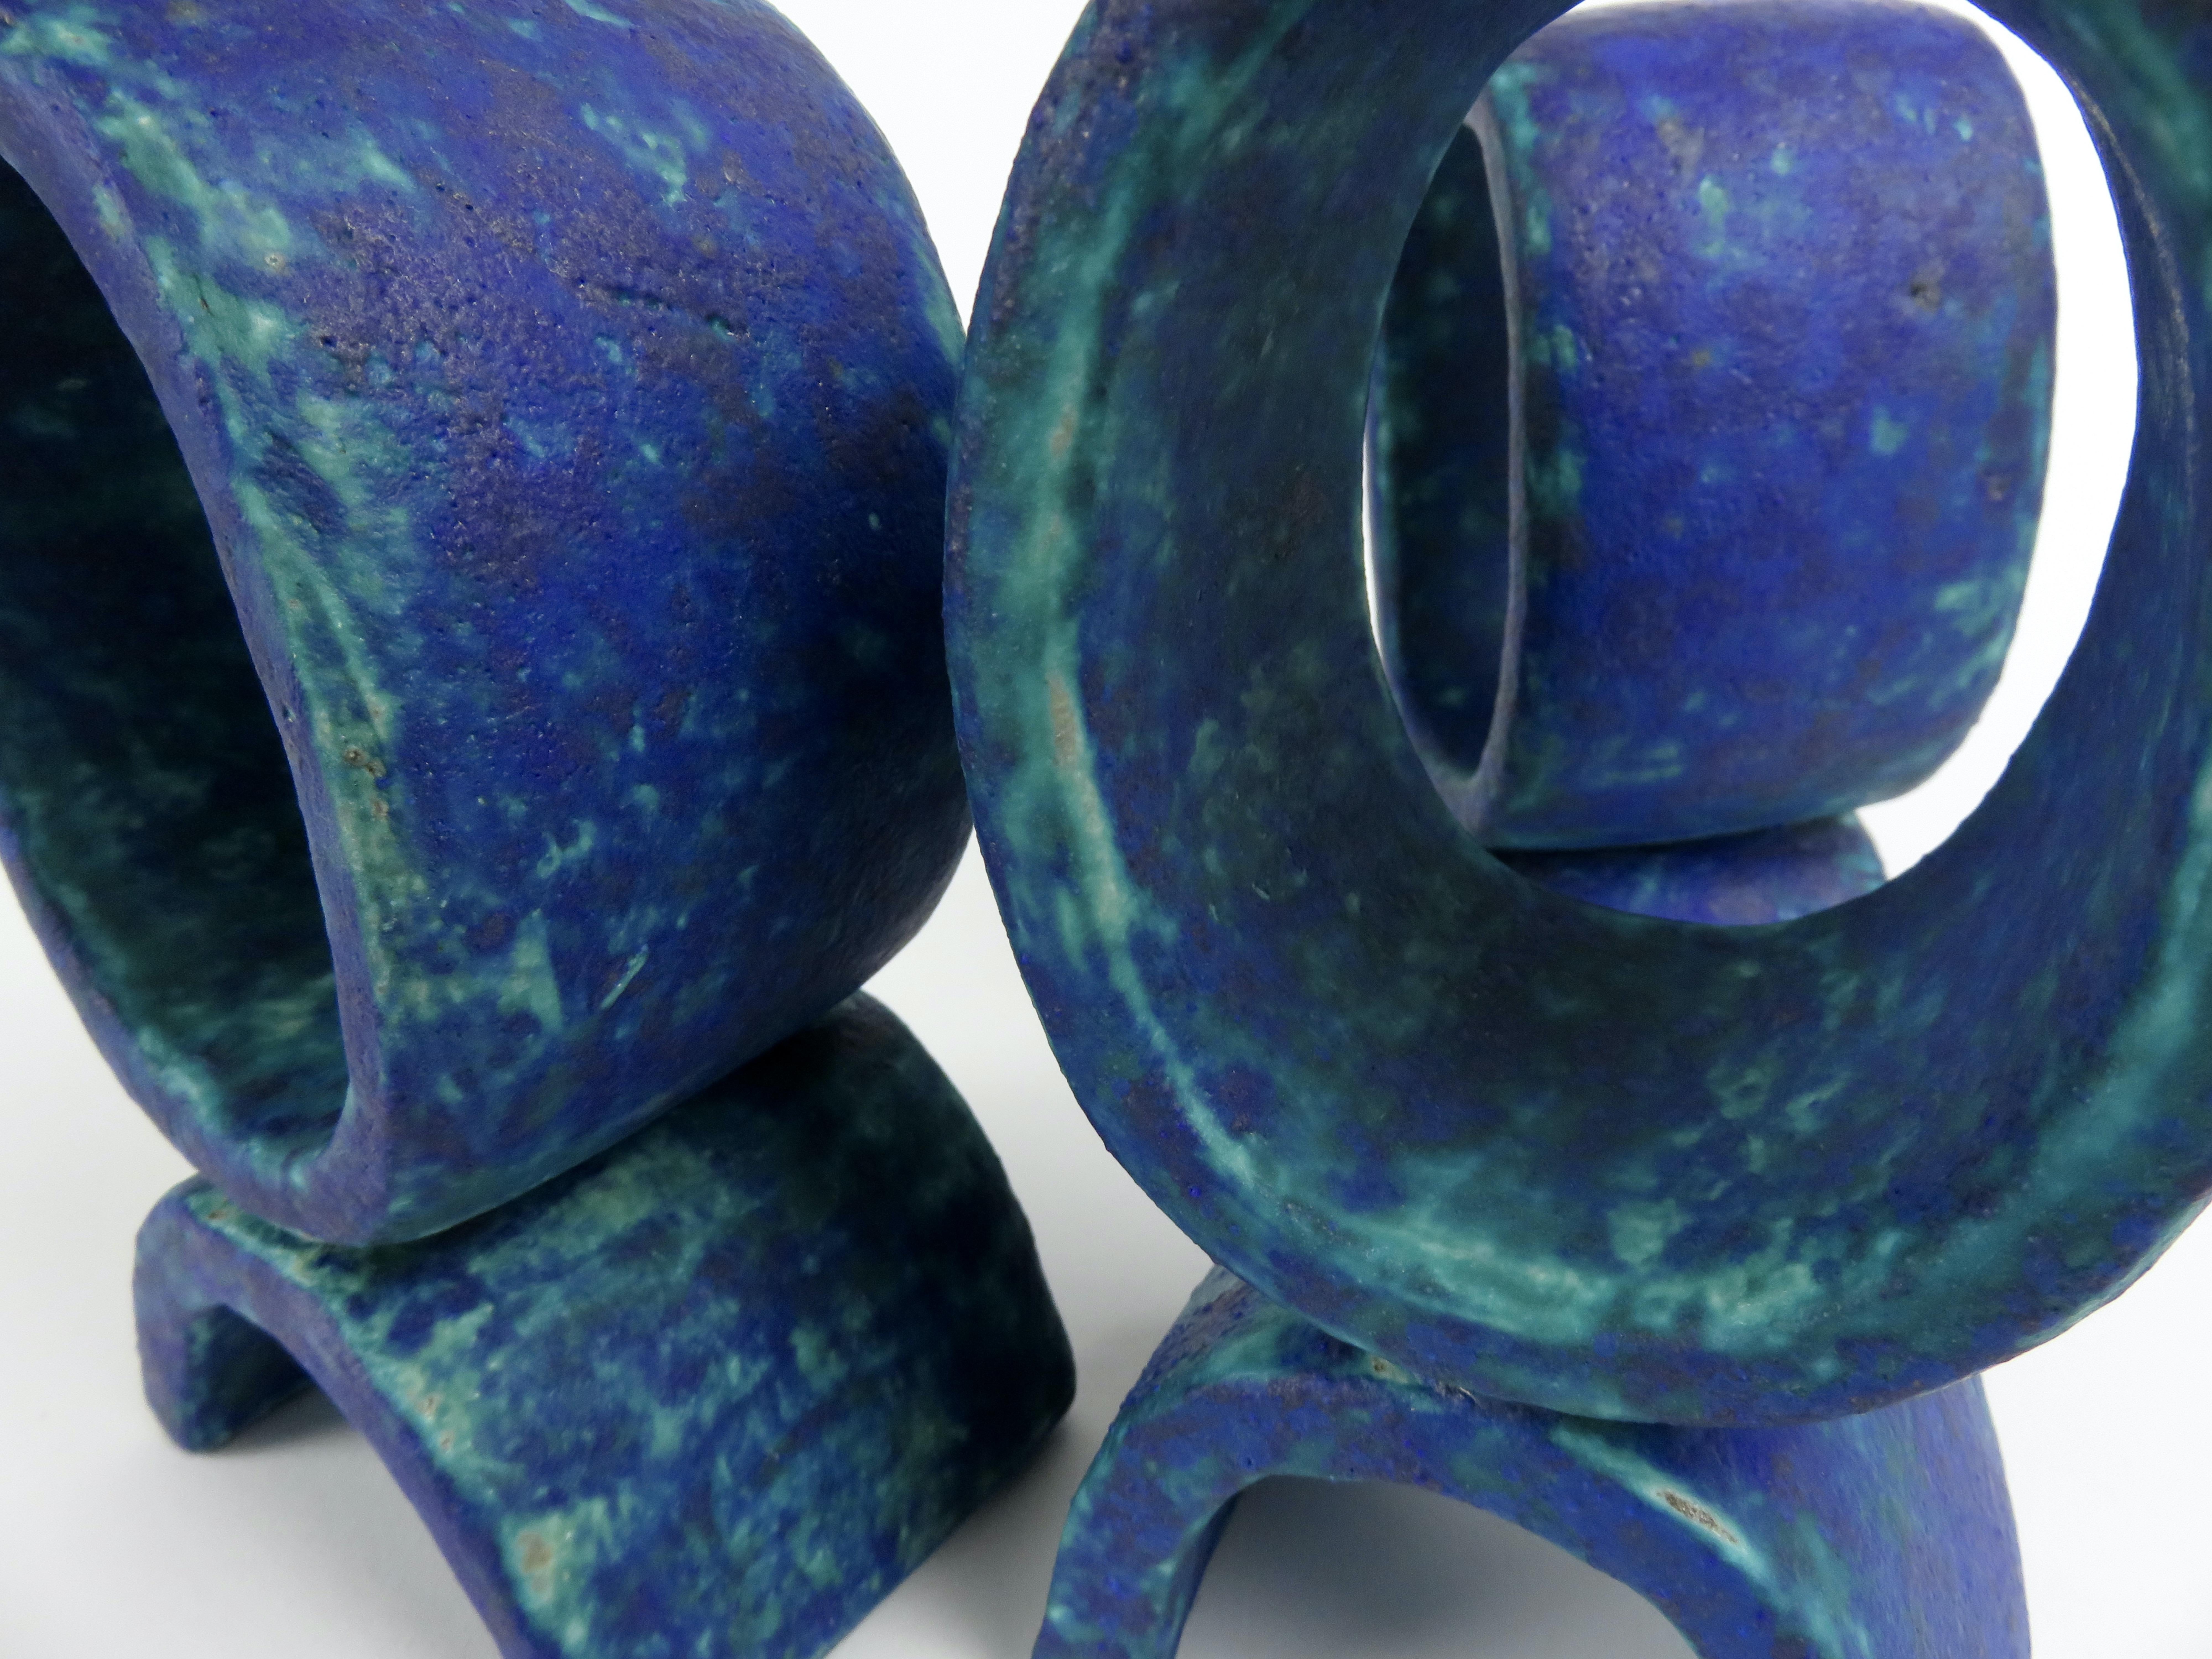 Mottled Turquoise and Deep Blue, 3 Ceramic Totems, Single Rings on Curved Legs For Sale 5